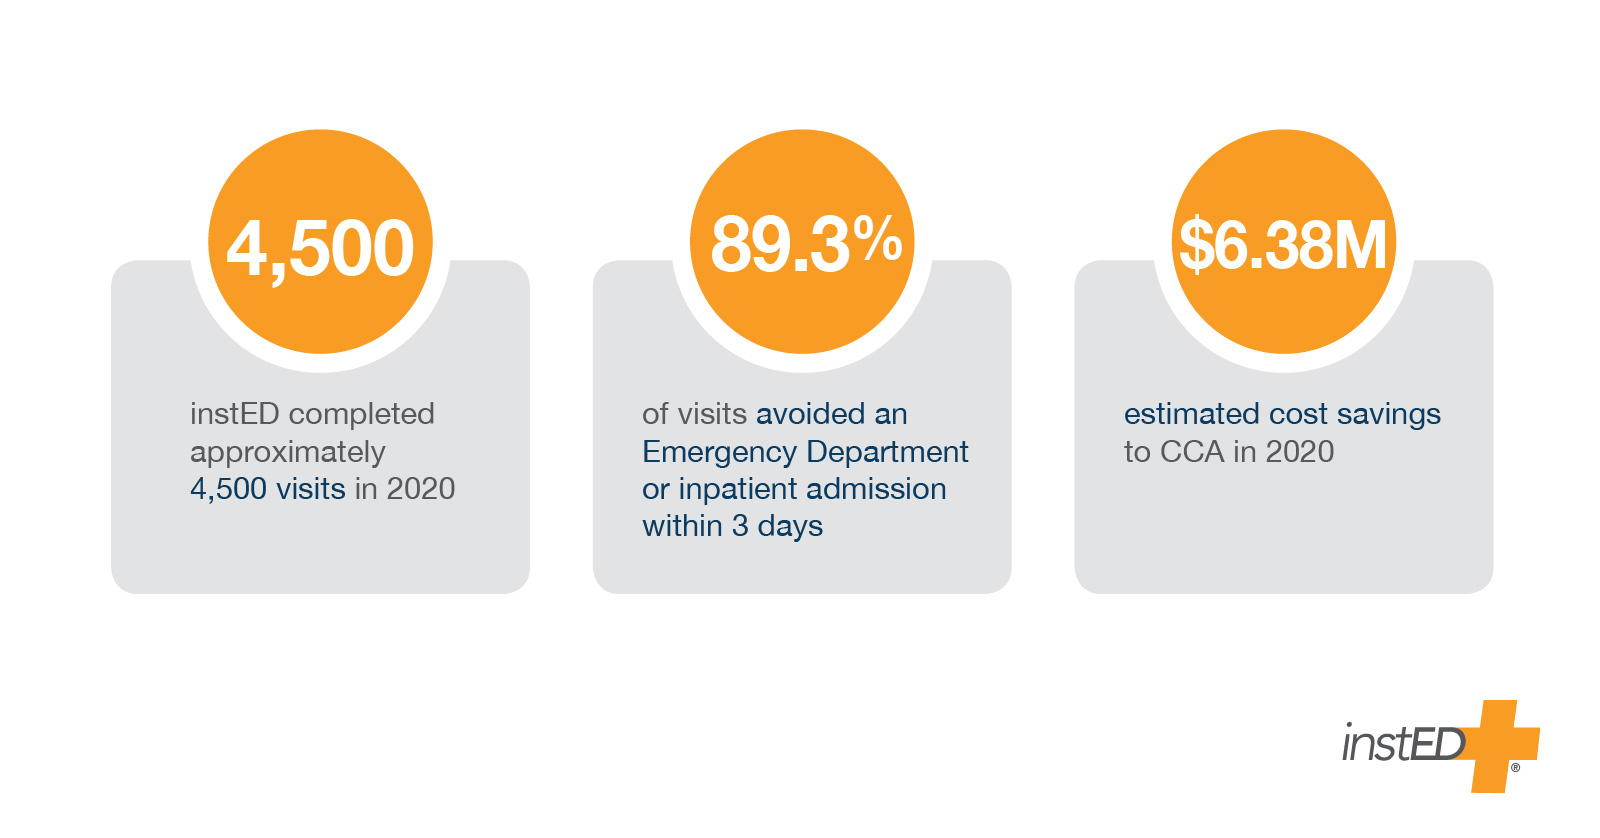 Graphic showing instED completed 4,500 visits in 2020; 89.3% of visits avoided an Emergency Department or inpatient admission within 3 days; and $6.38M estimated cost savings to CCA Health in 2020